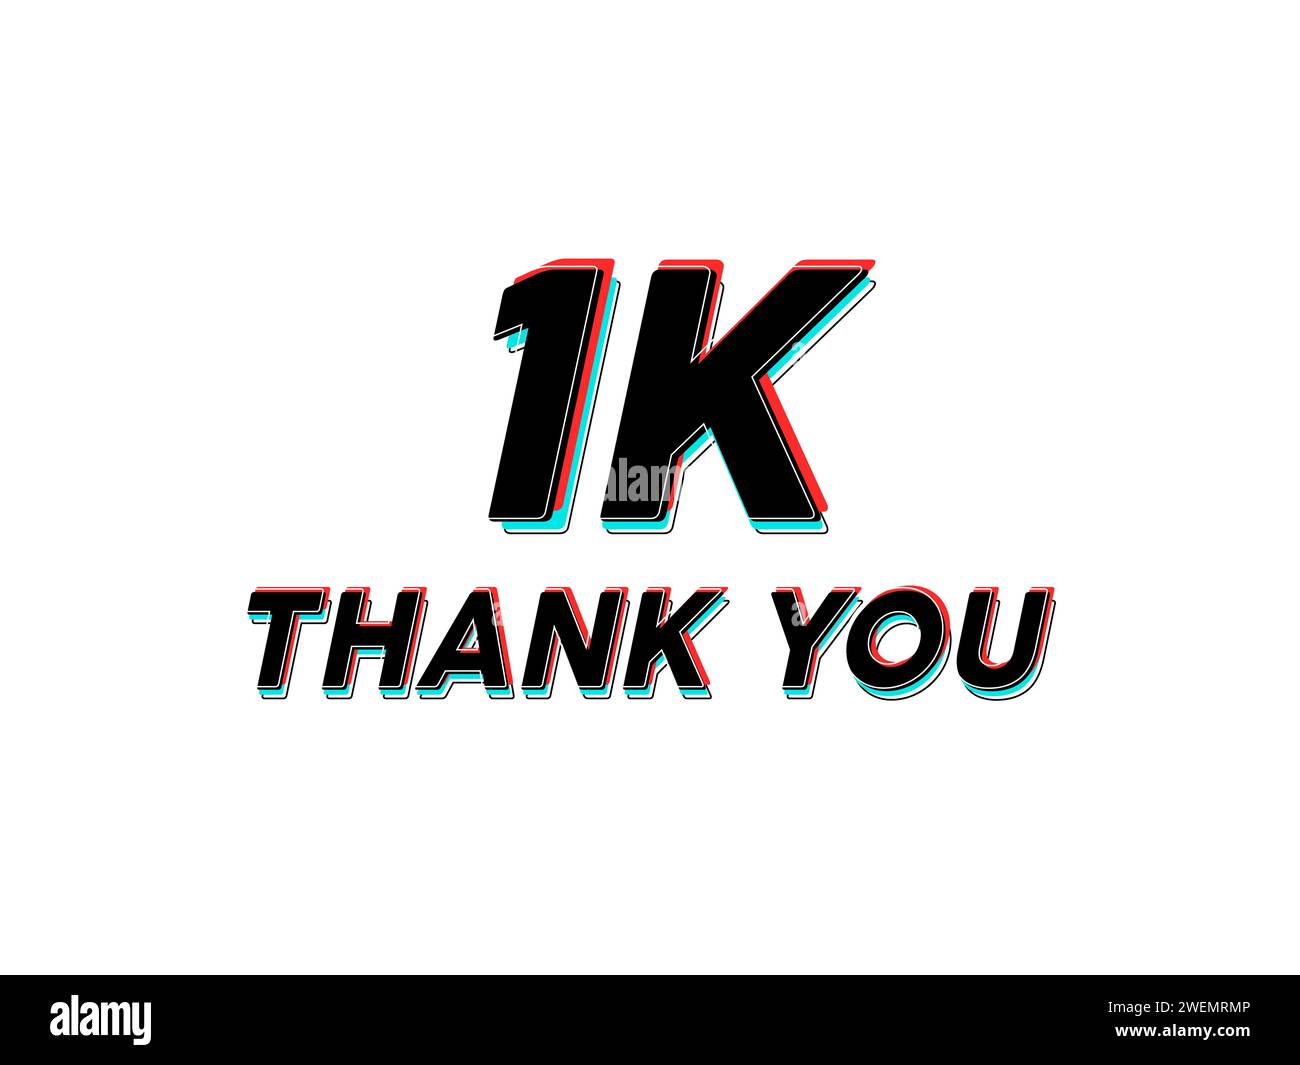 A creative '1K thank you' message with a 3D red and blue effect on a white background Stock Photo